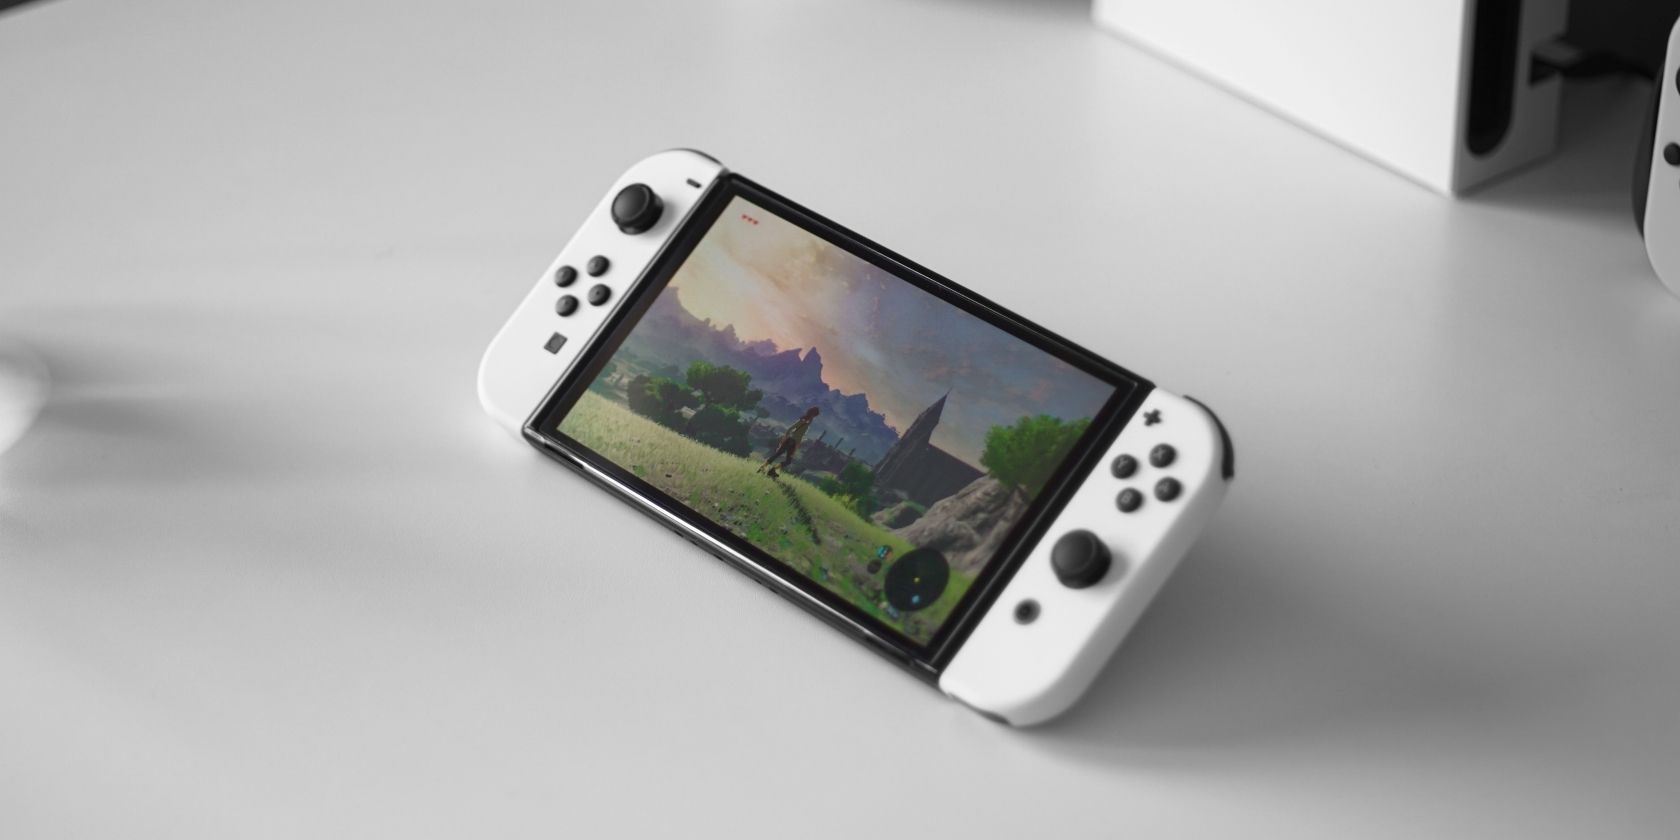 A photograph of a Nintendo Switch OLED console atop a white surface